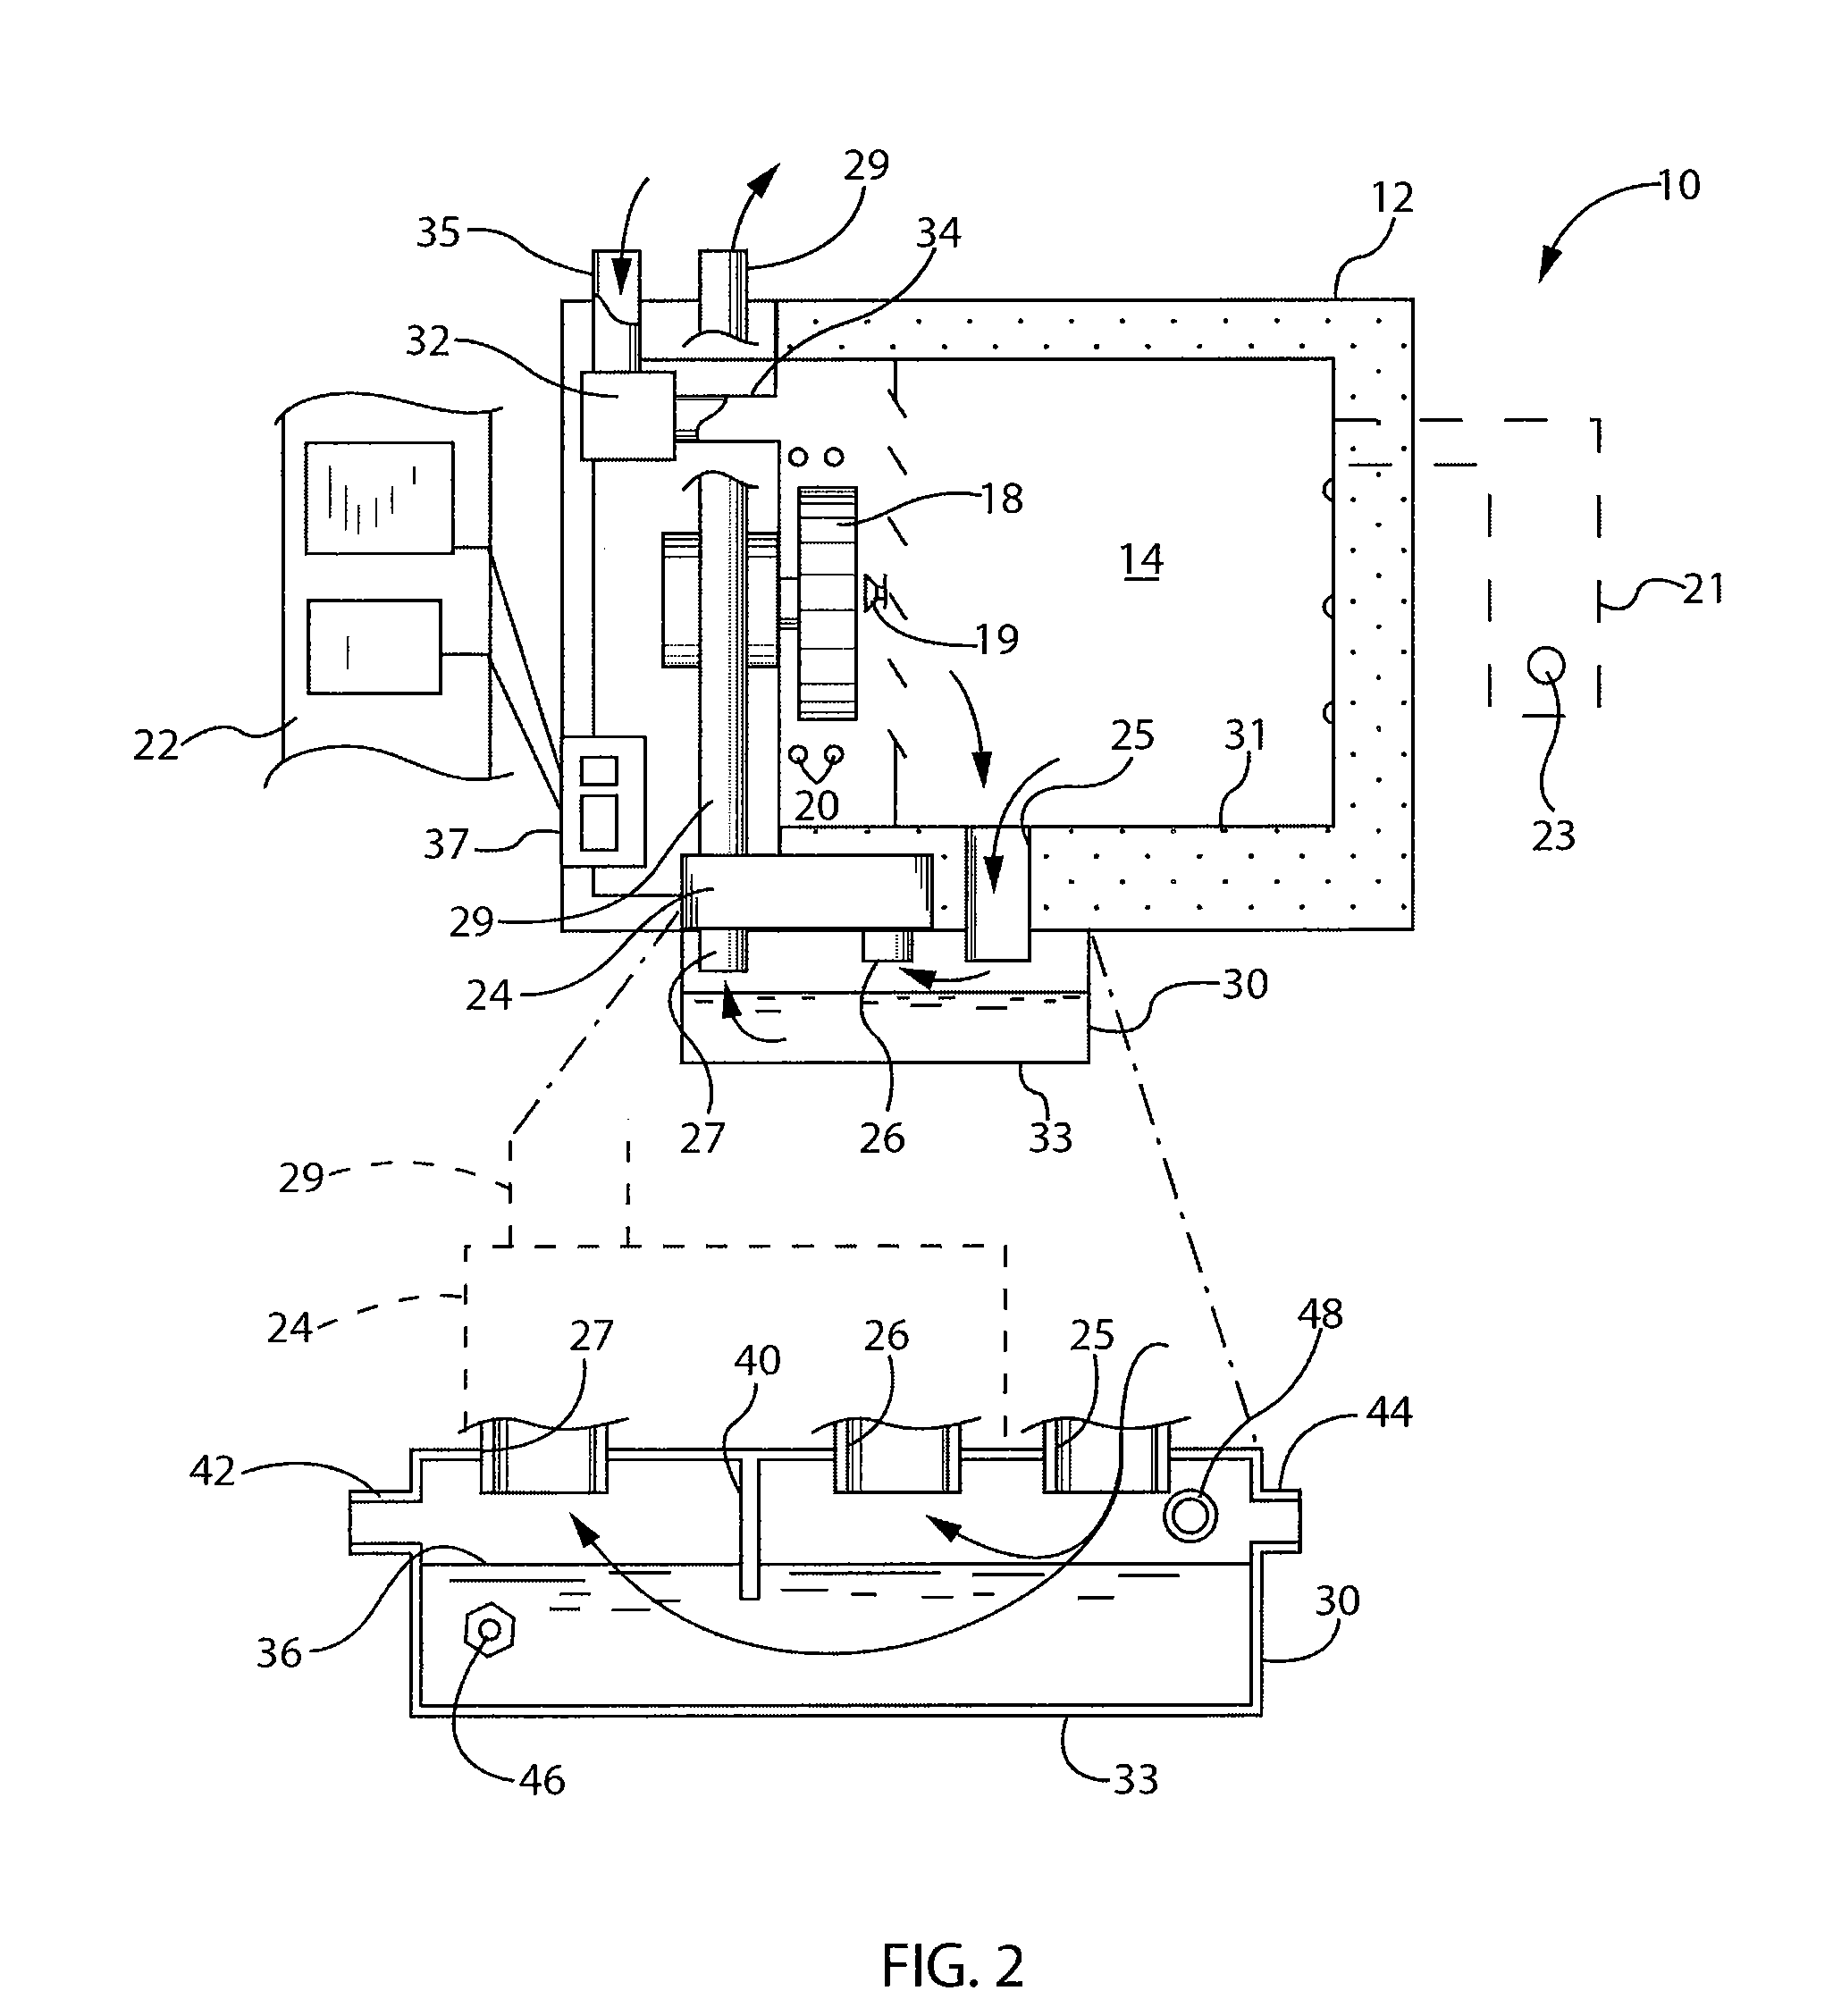 Oven with Automatic Open/Closed System Mode Control